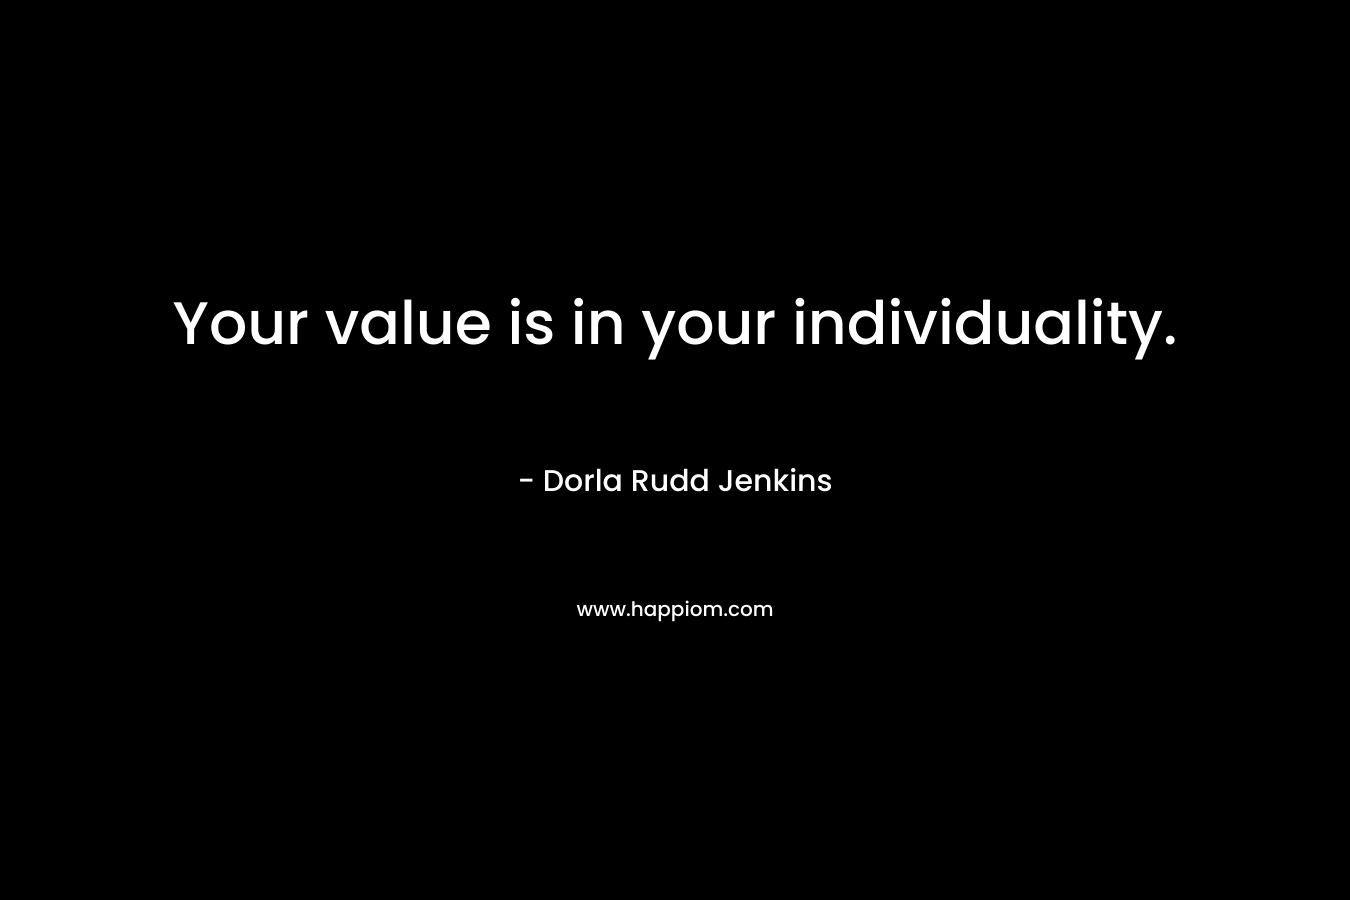 Your value is in your individuality. – Dorla Rudd Jenkins